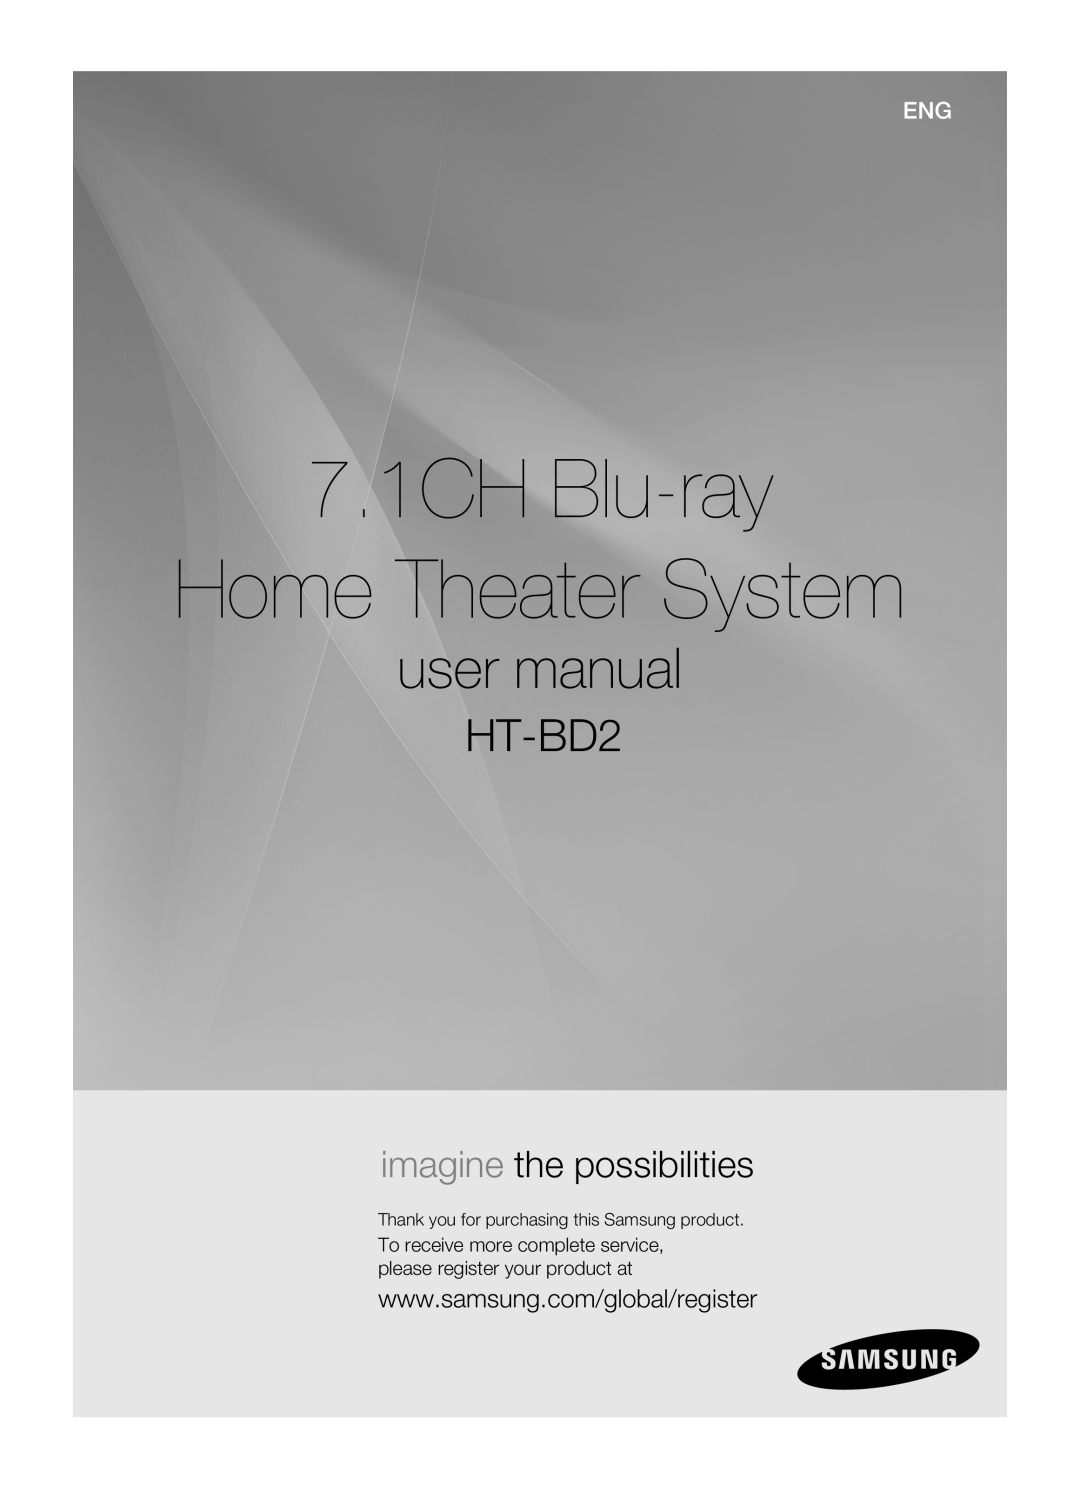 Samsung HT-BD2 7.1CH Blu-ray Home Theater System, user manual, imagine the possibilities 